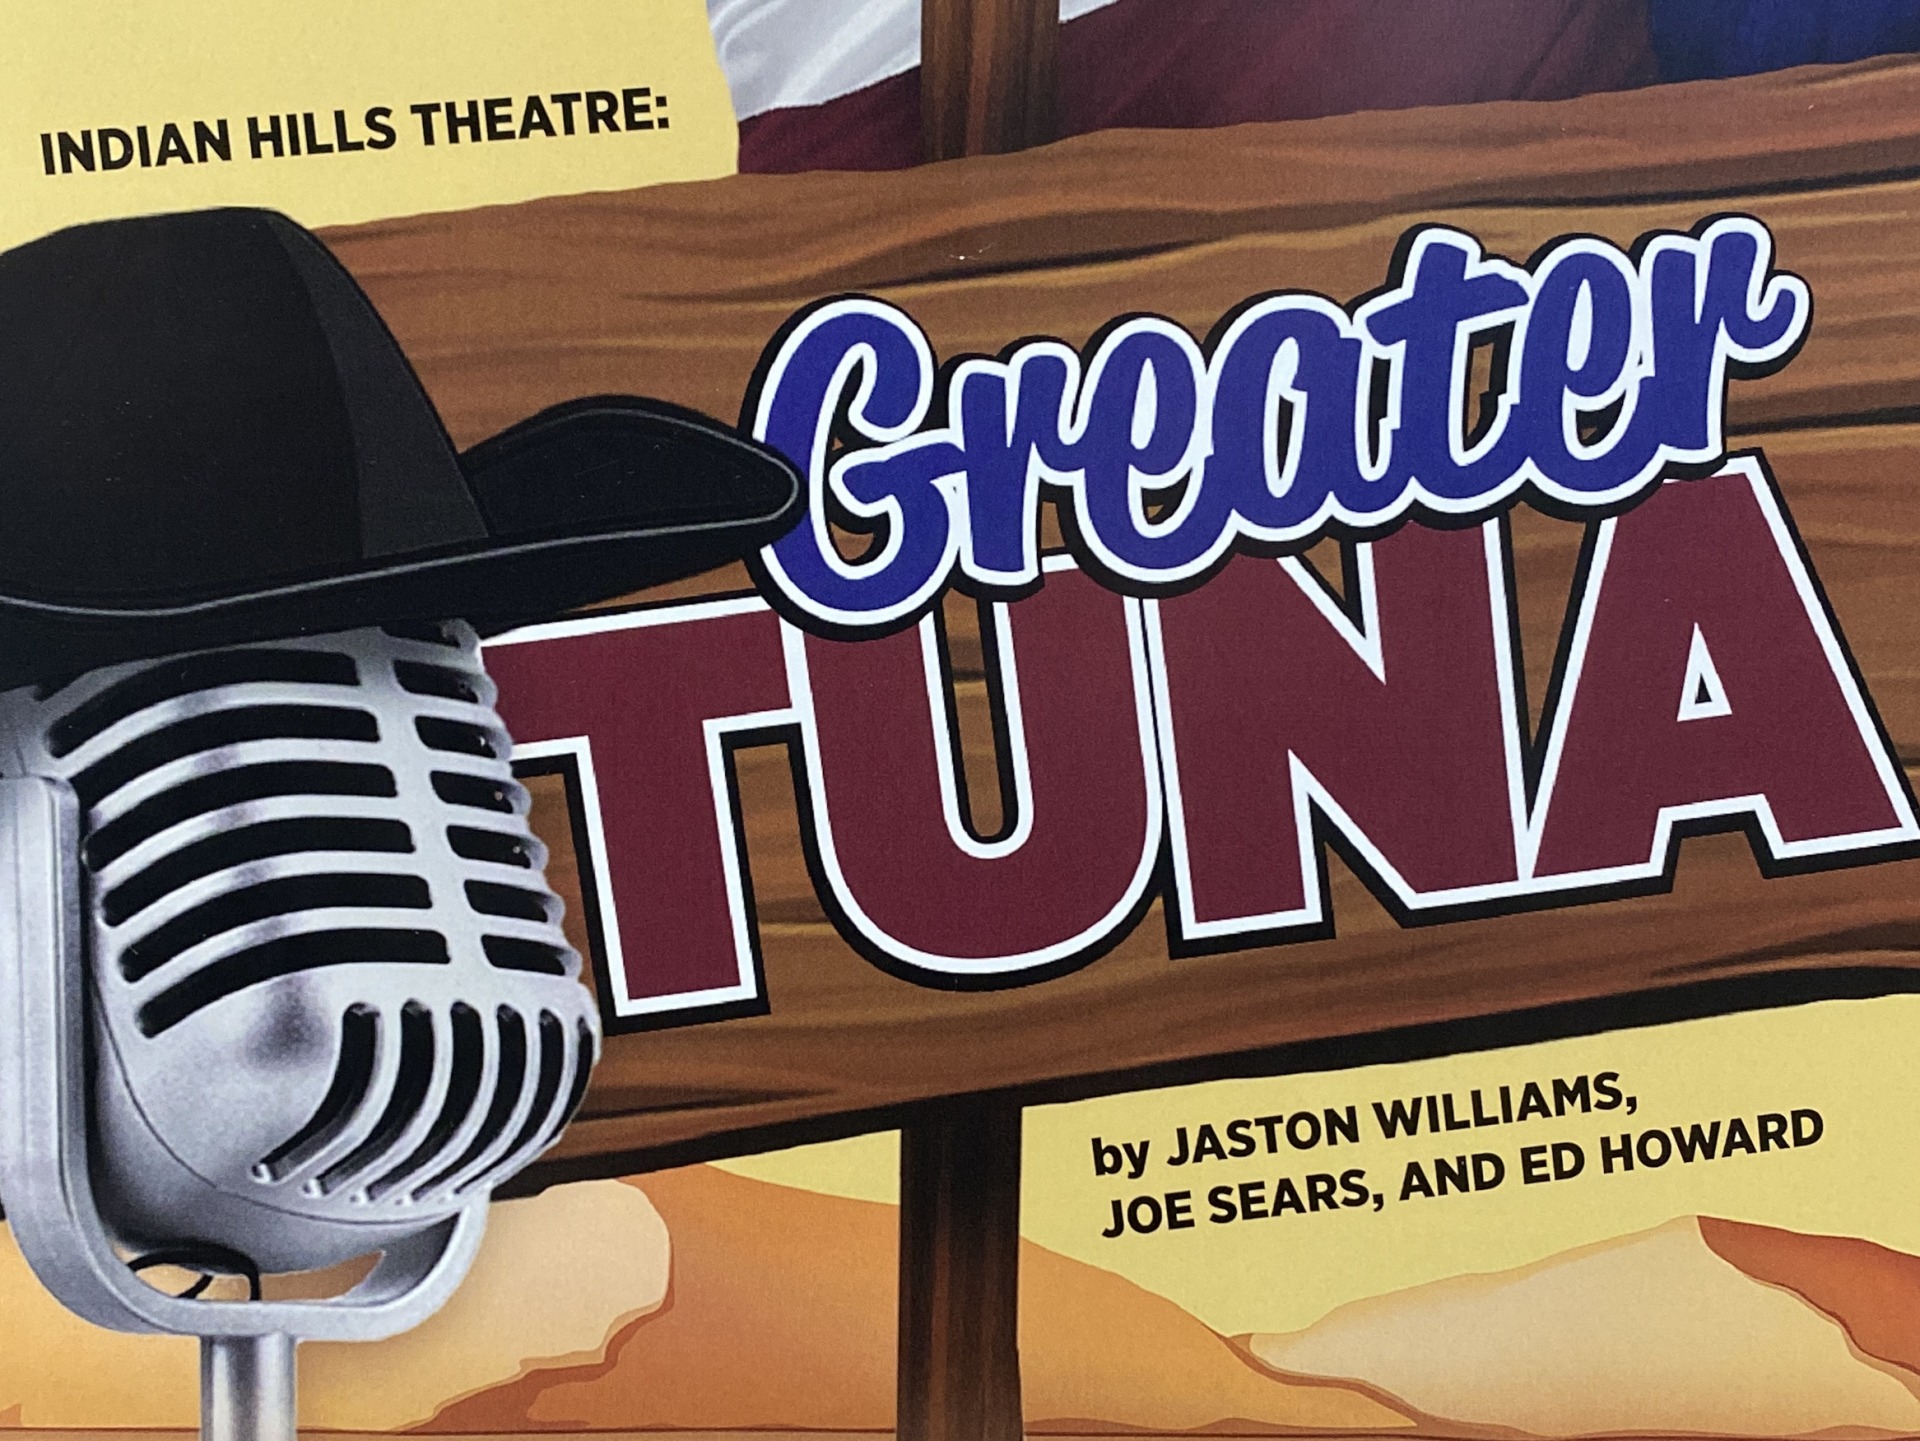 Indian Hills Theatre: Greater Tuna